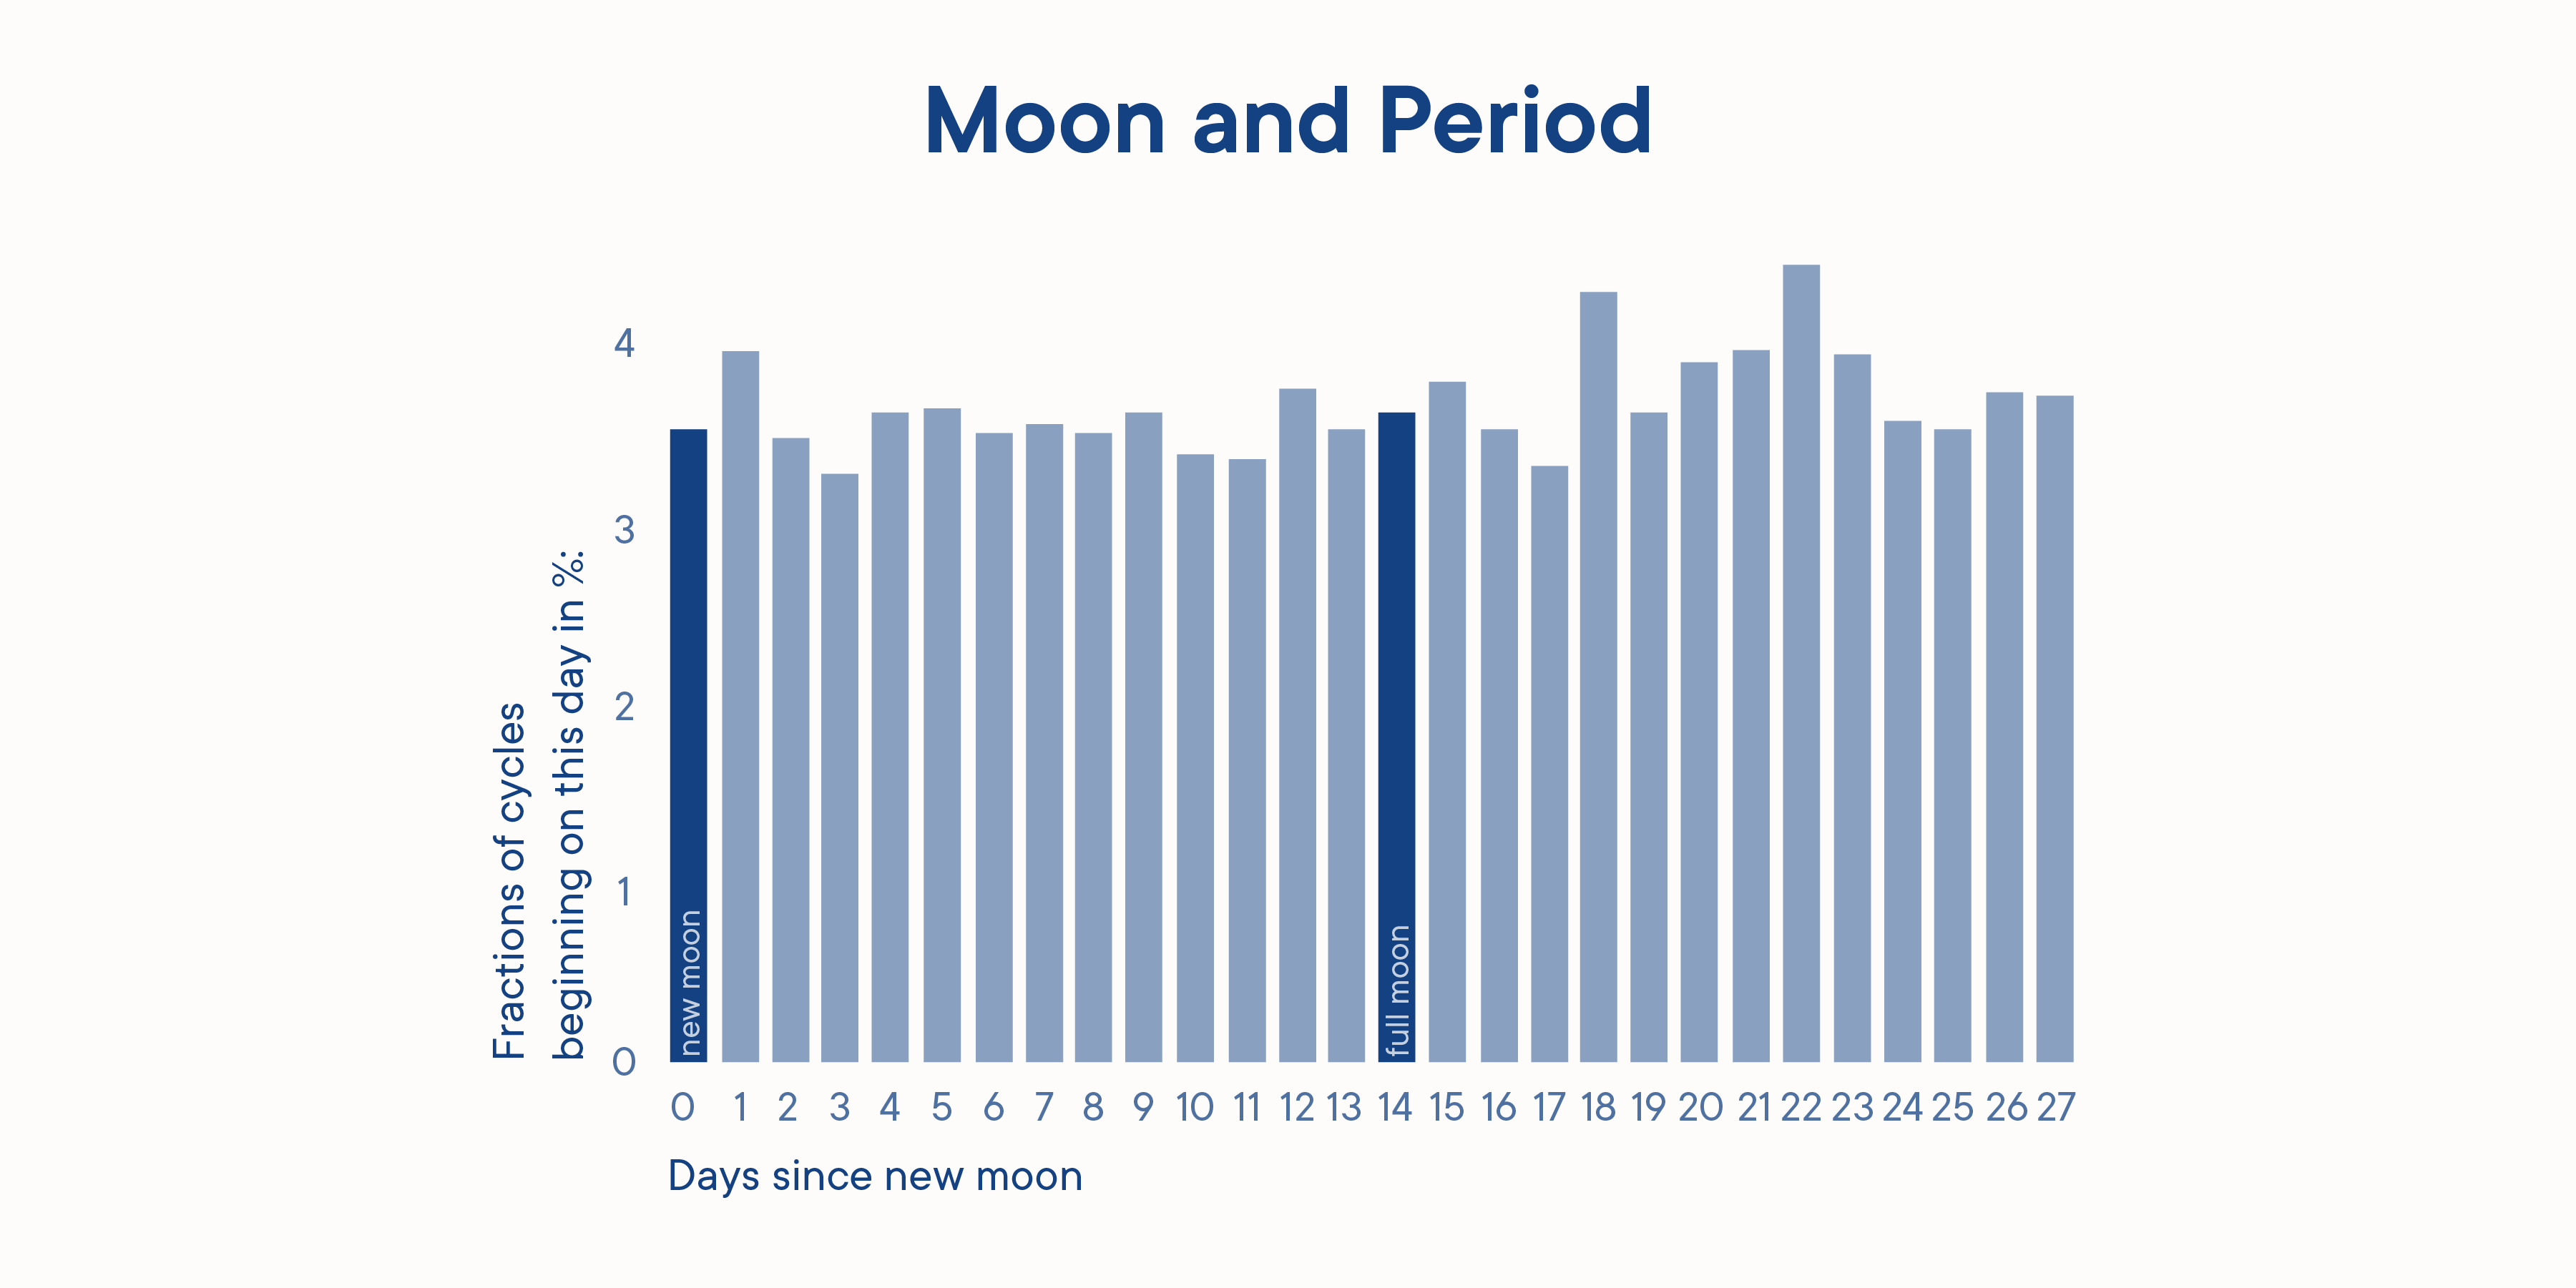 moon and period graph, showin the days since the new moon and the fraction of cylces starting on this days in %